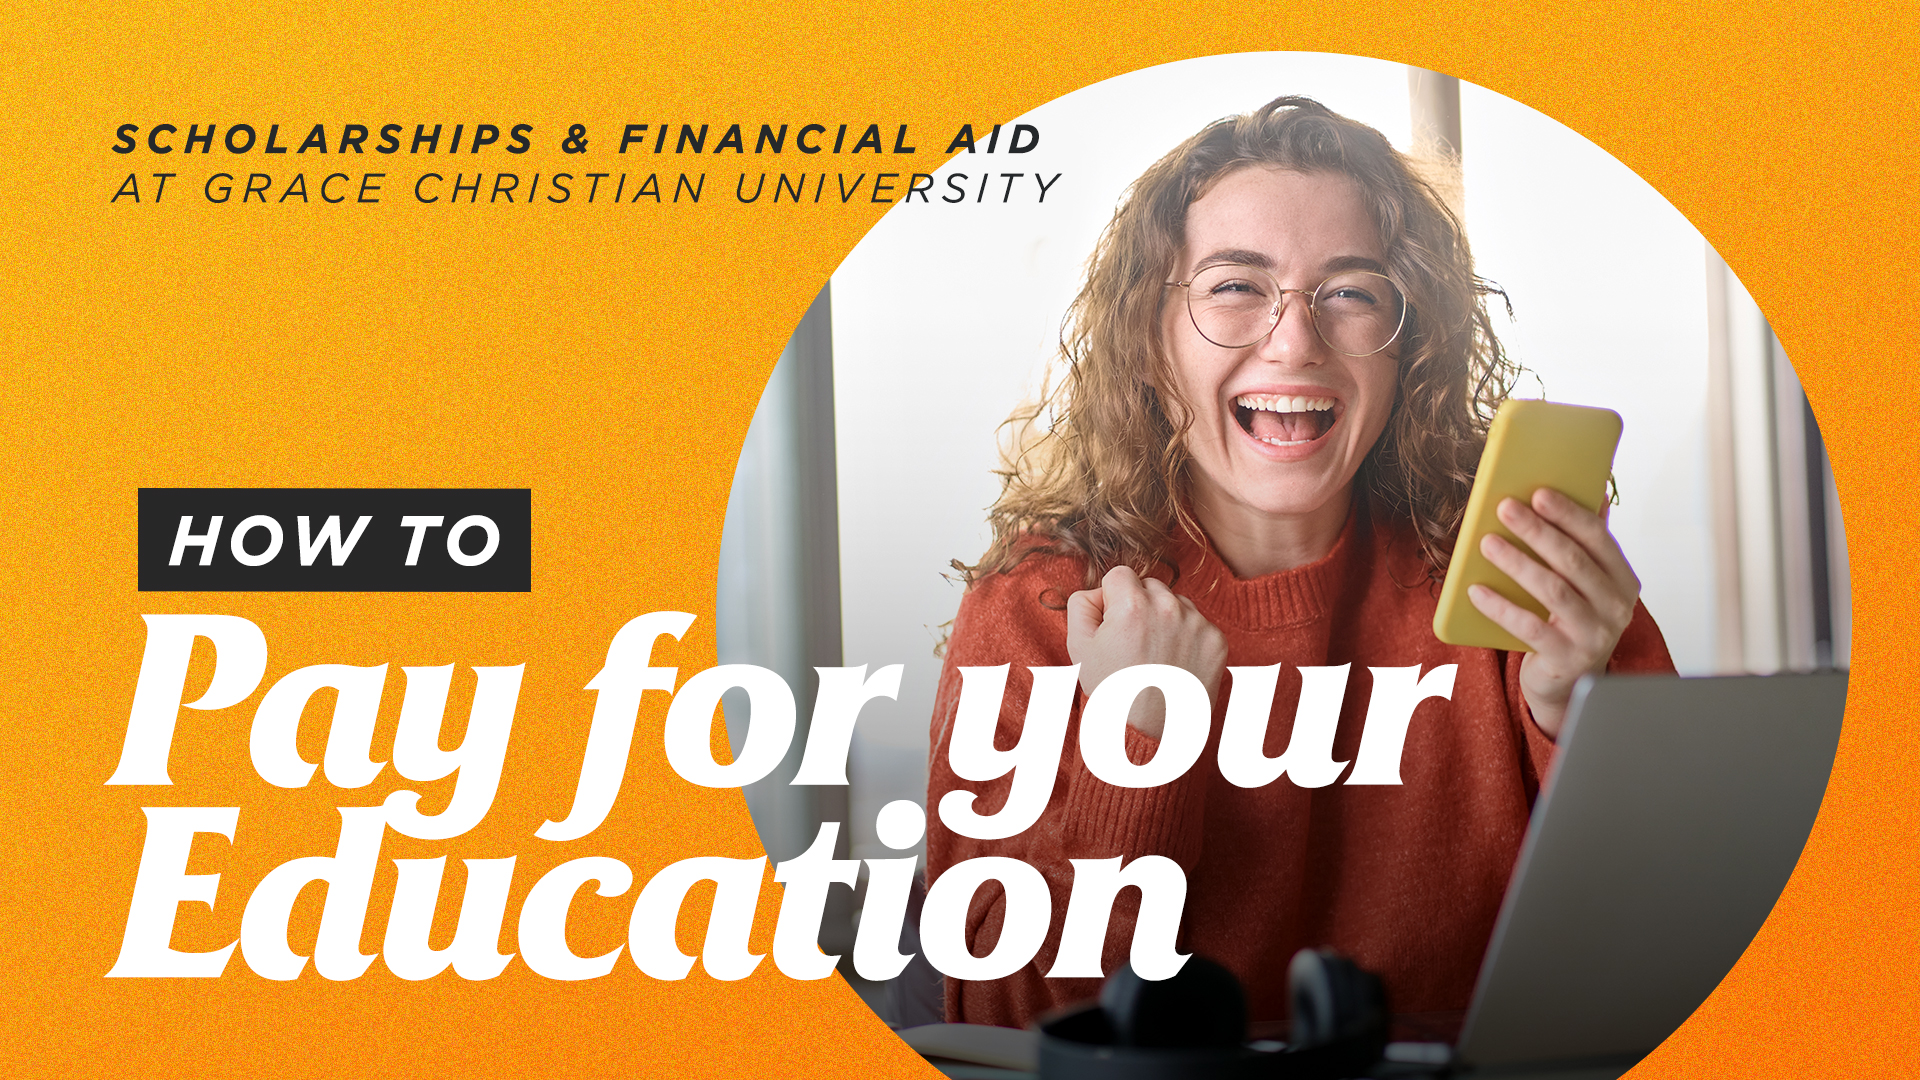 Scholarships and Financial Aid at Grace Christian University